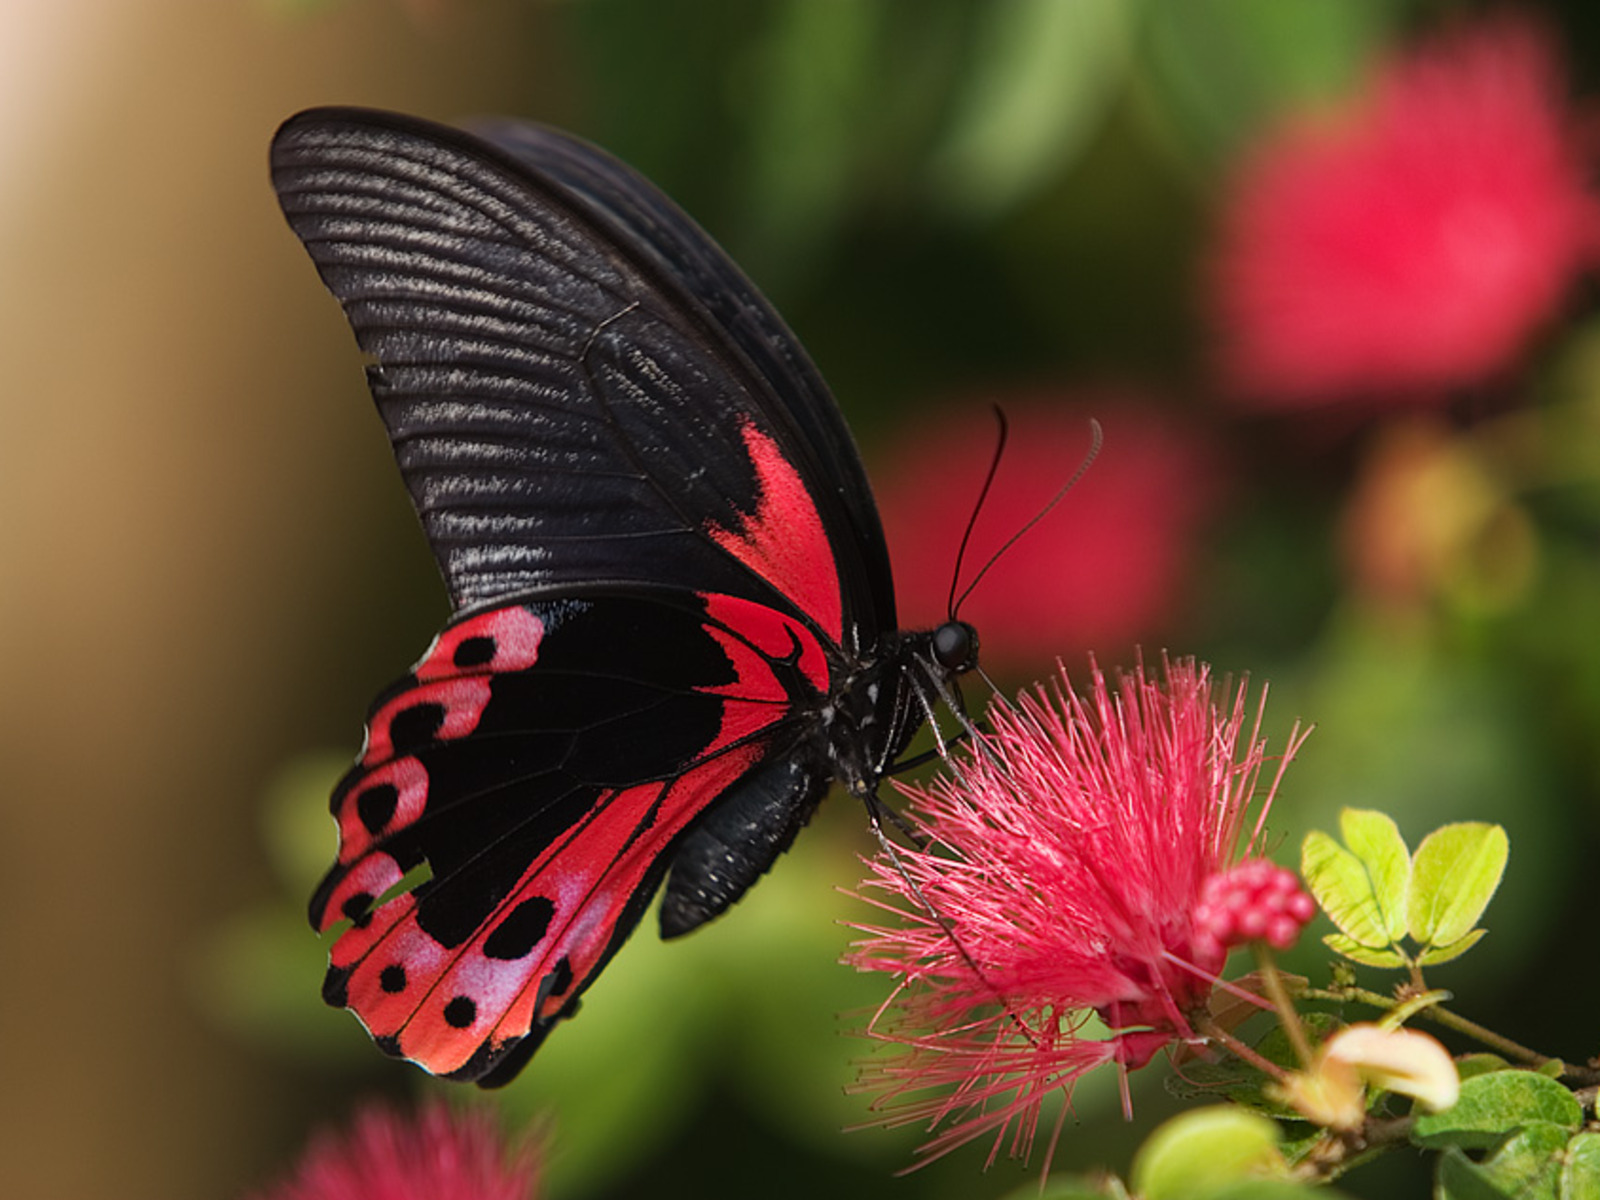 What A Beautiful Art Photography Of Amazing Black Red Colorful Butterfly Steemit